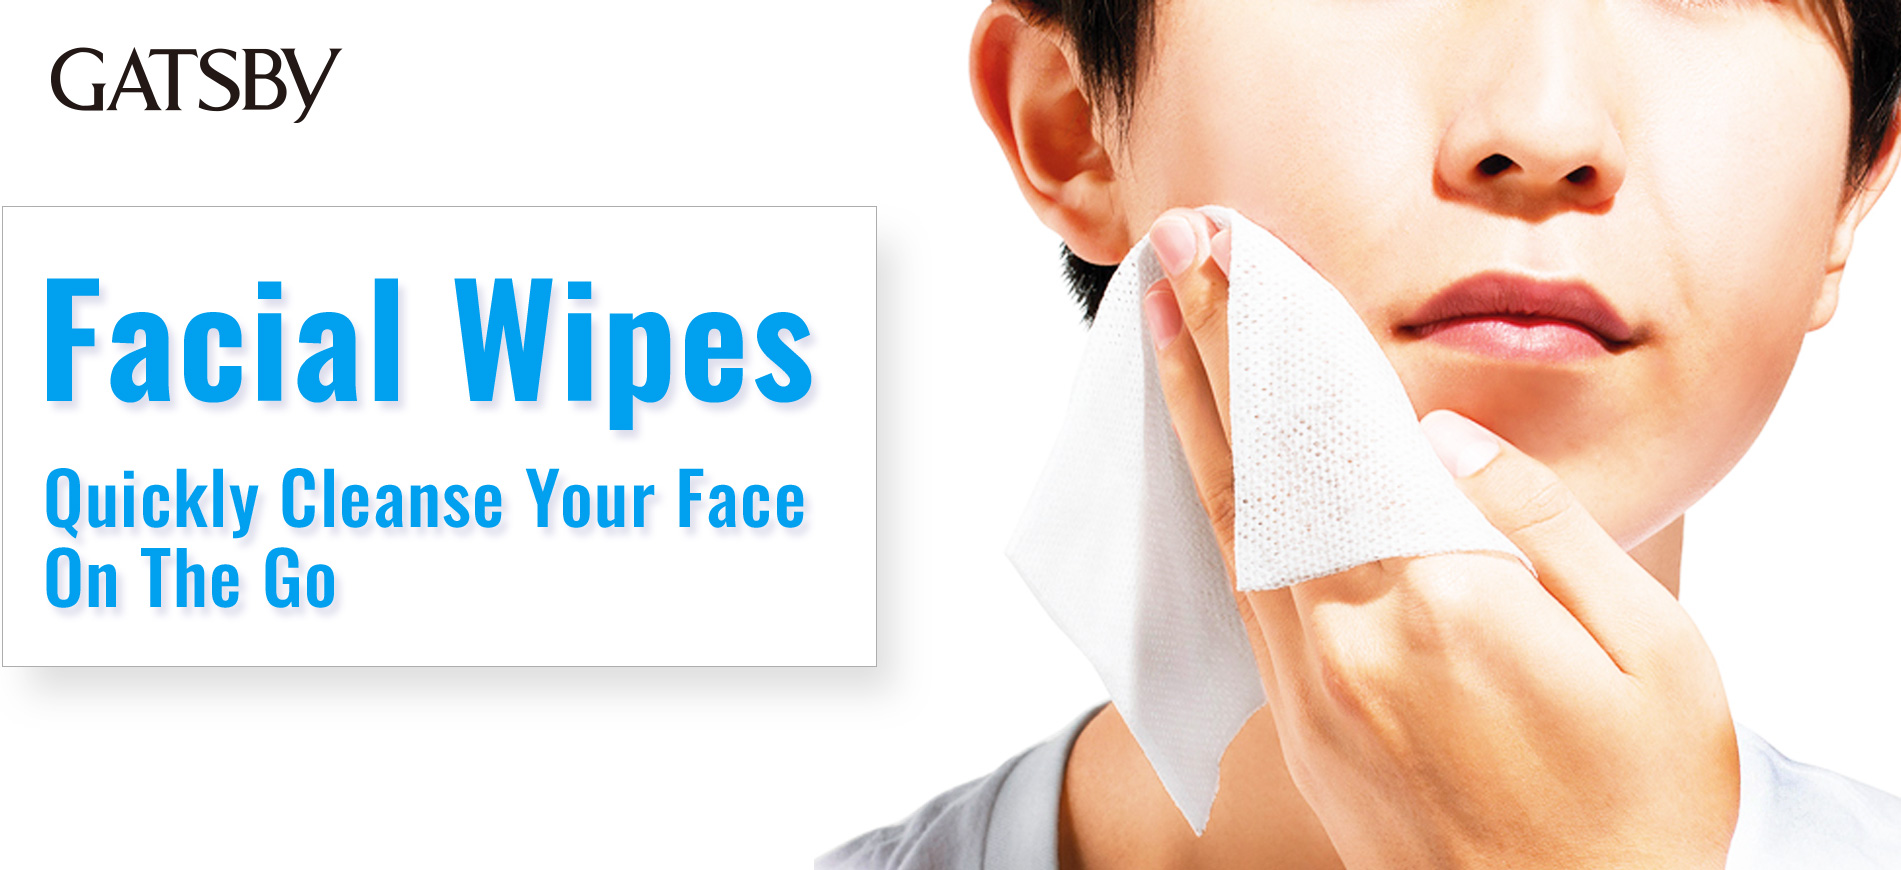 Facial Wipes: Quickly Cleanse Your Face on the Go